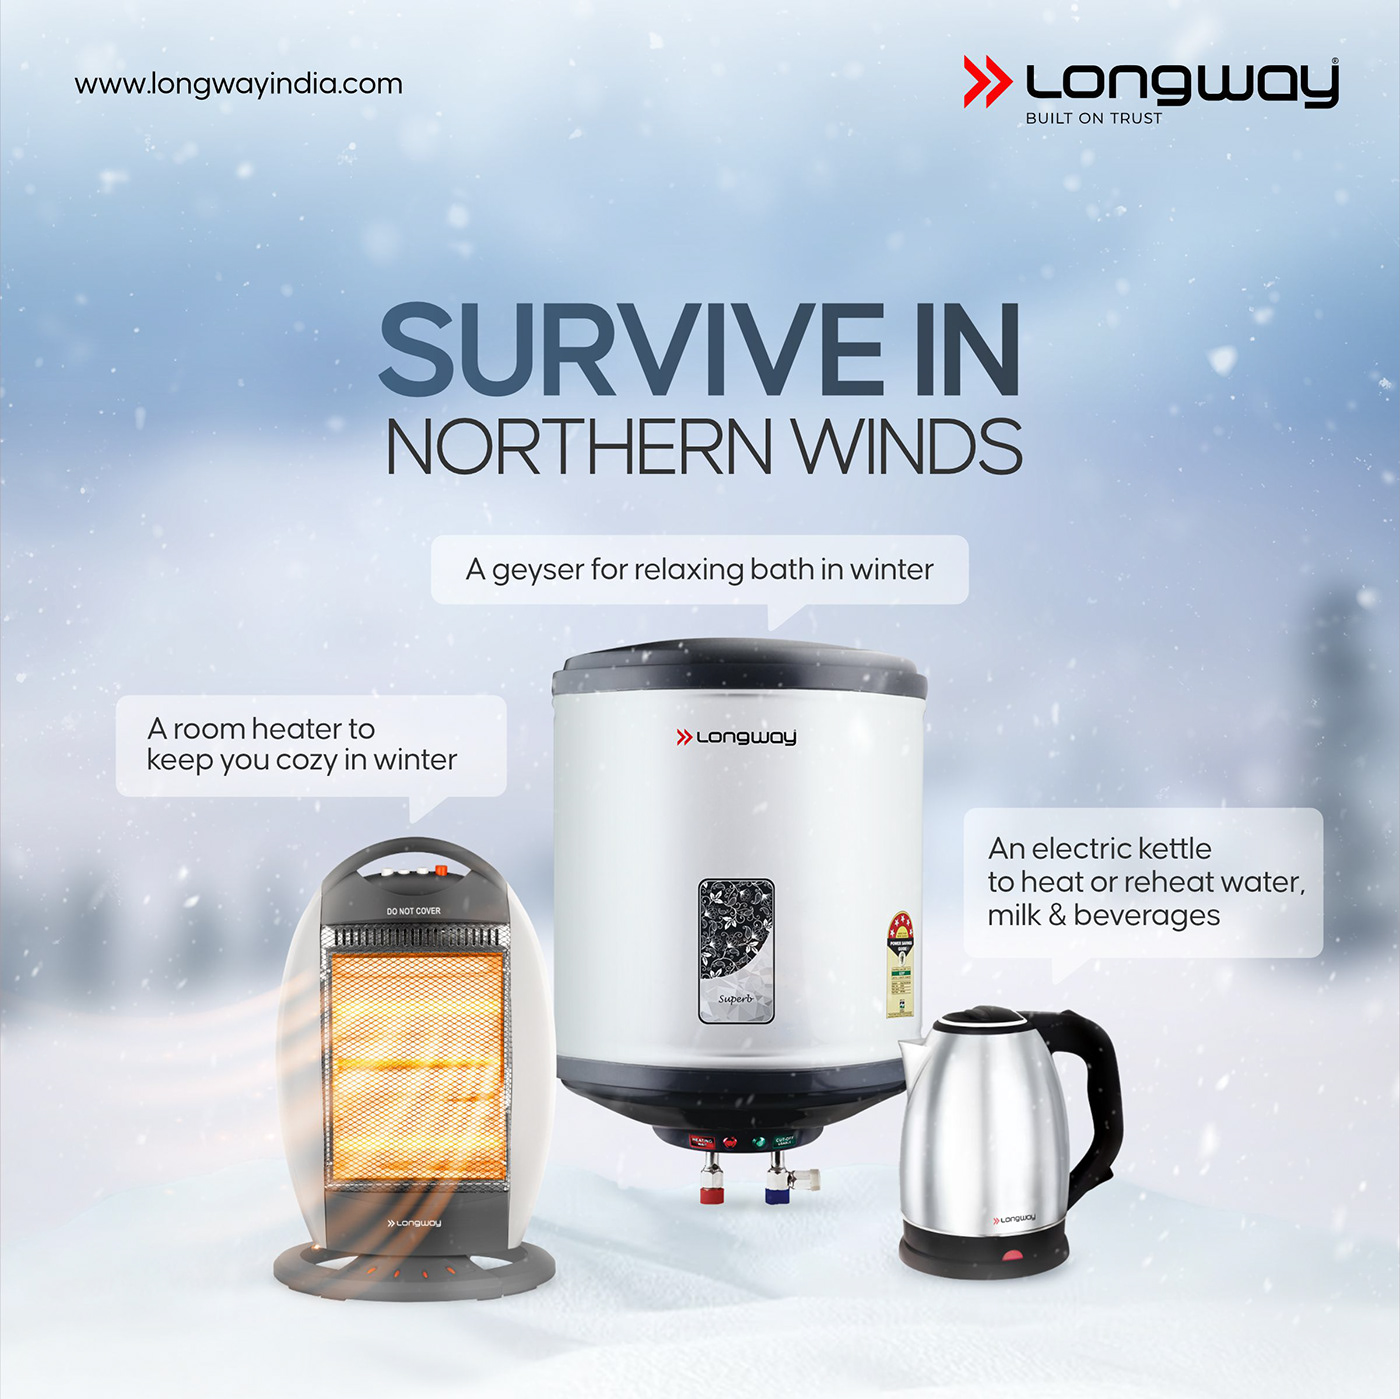 Survive in Northern Winds with Longway